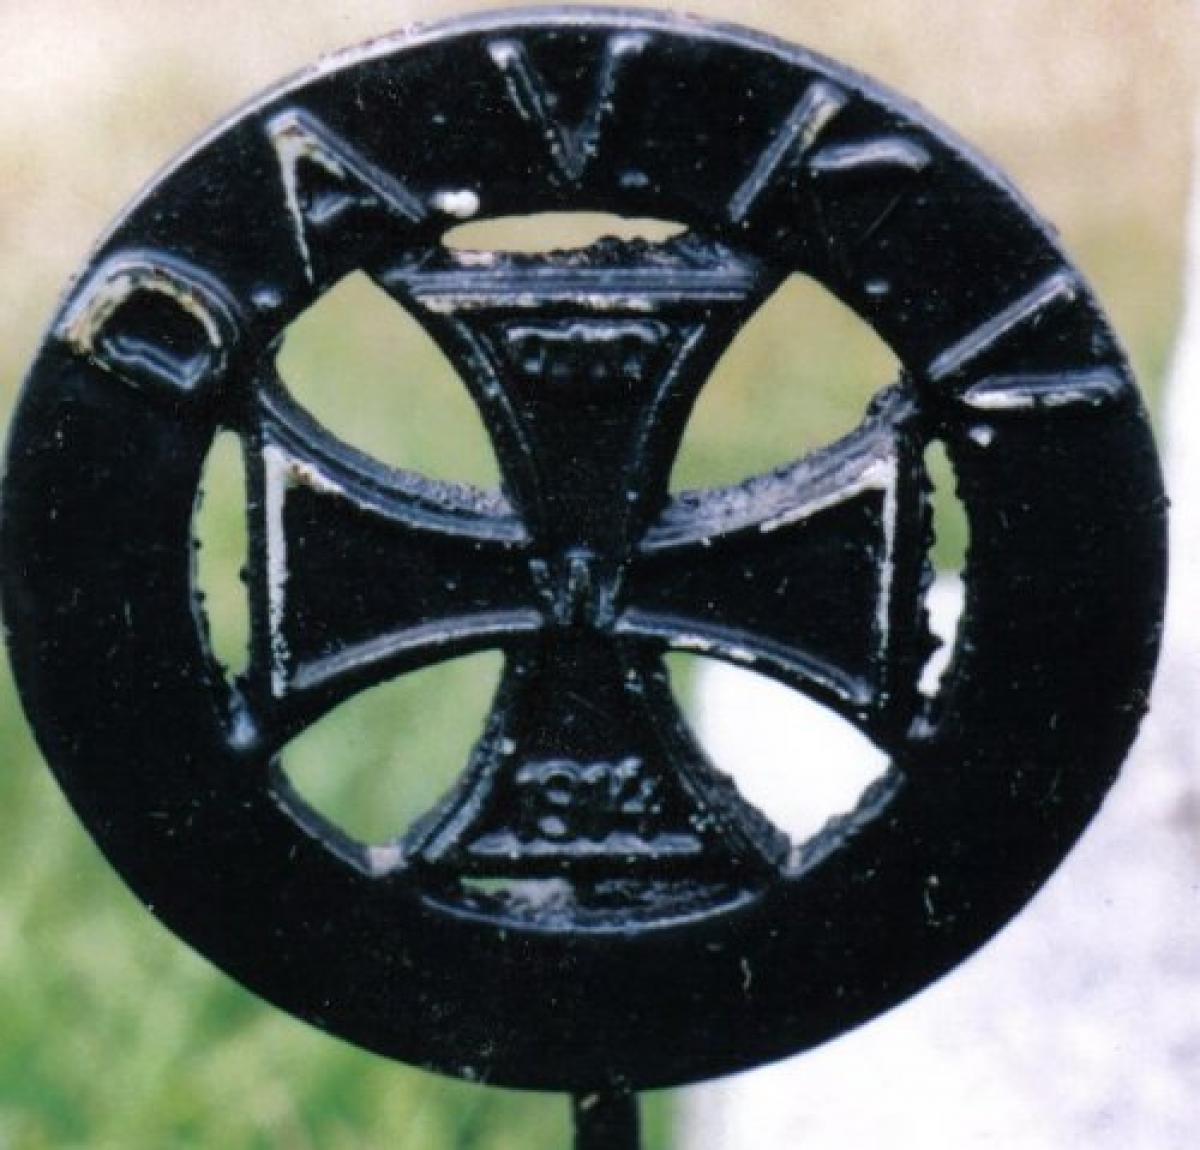 OK, Grove, Headstone Symbols and Meanings, Cross, Iron